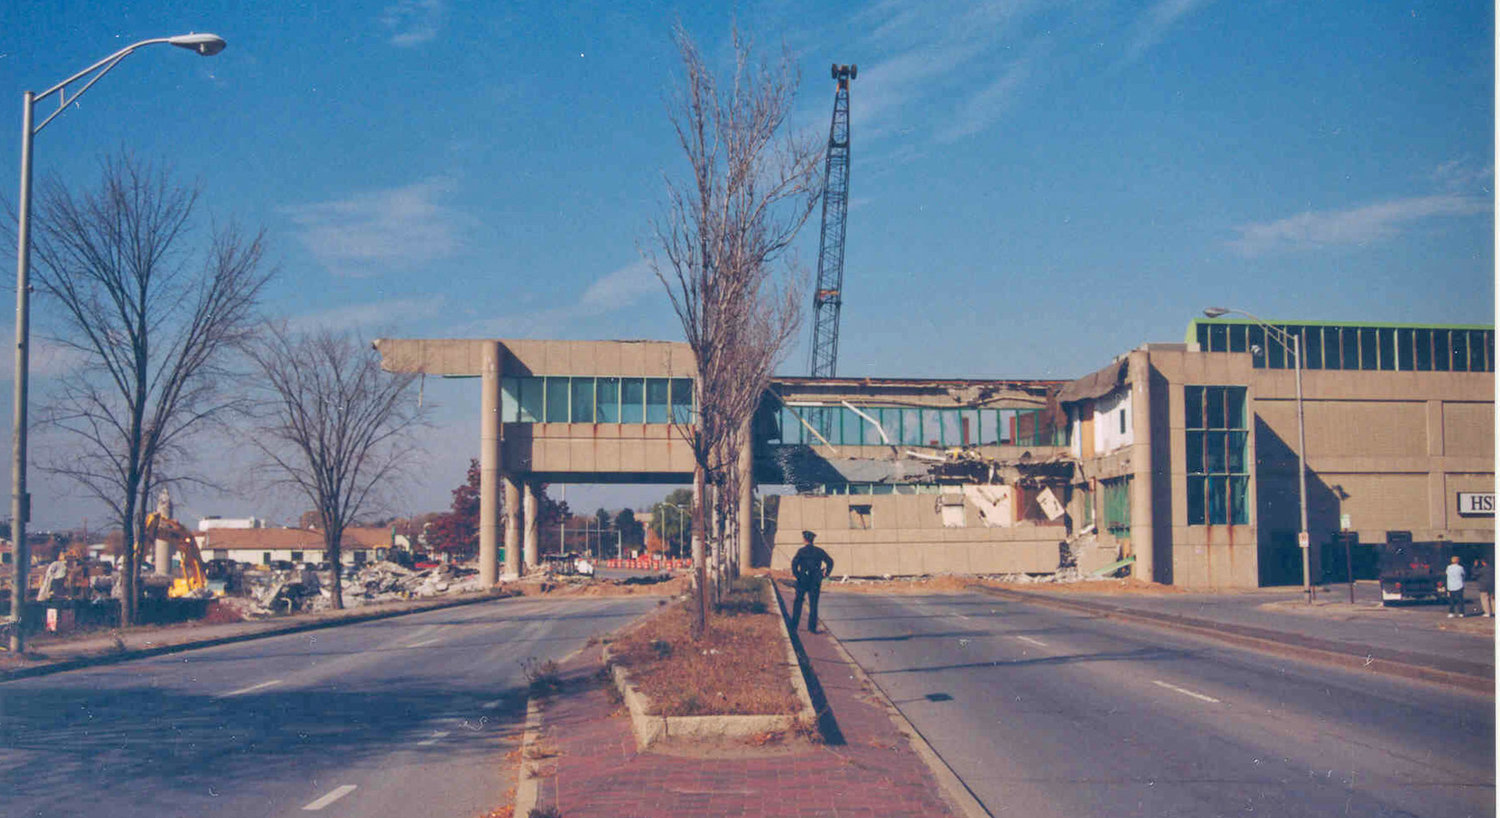 This photo shows the former Living Bridge in Downtown Rome as undergoes demolition in this file photo. The bridge, built as part of the urban renewal effort in the 1970s, was eventually torn down in a process that began in the late 1990s. That work, businesses say, helped lay a foundation to the growth of the city’s downtown area.